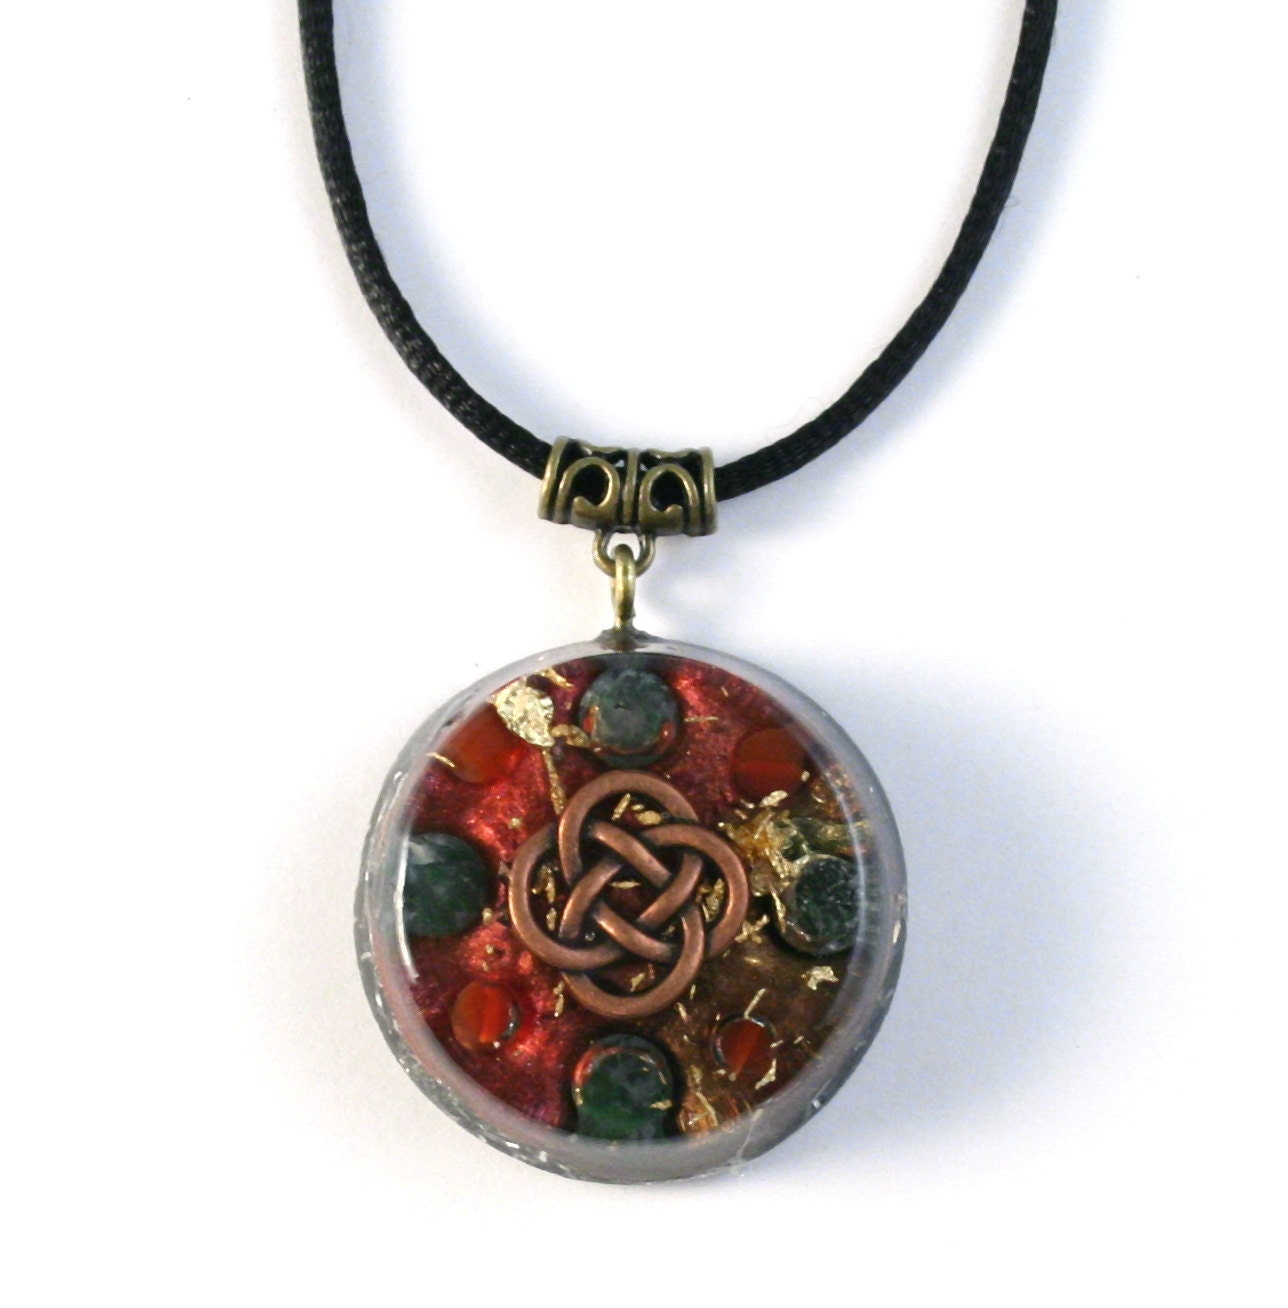 Celtic Knot Orgonite Pendant - Carnelian and Moss Agate - EMF Protection and Energy Healing - Orgone Jewelry - Small